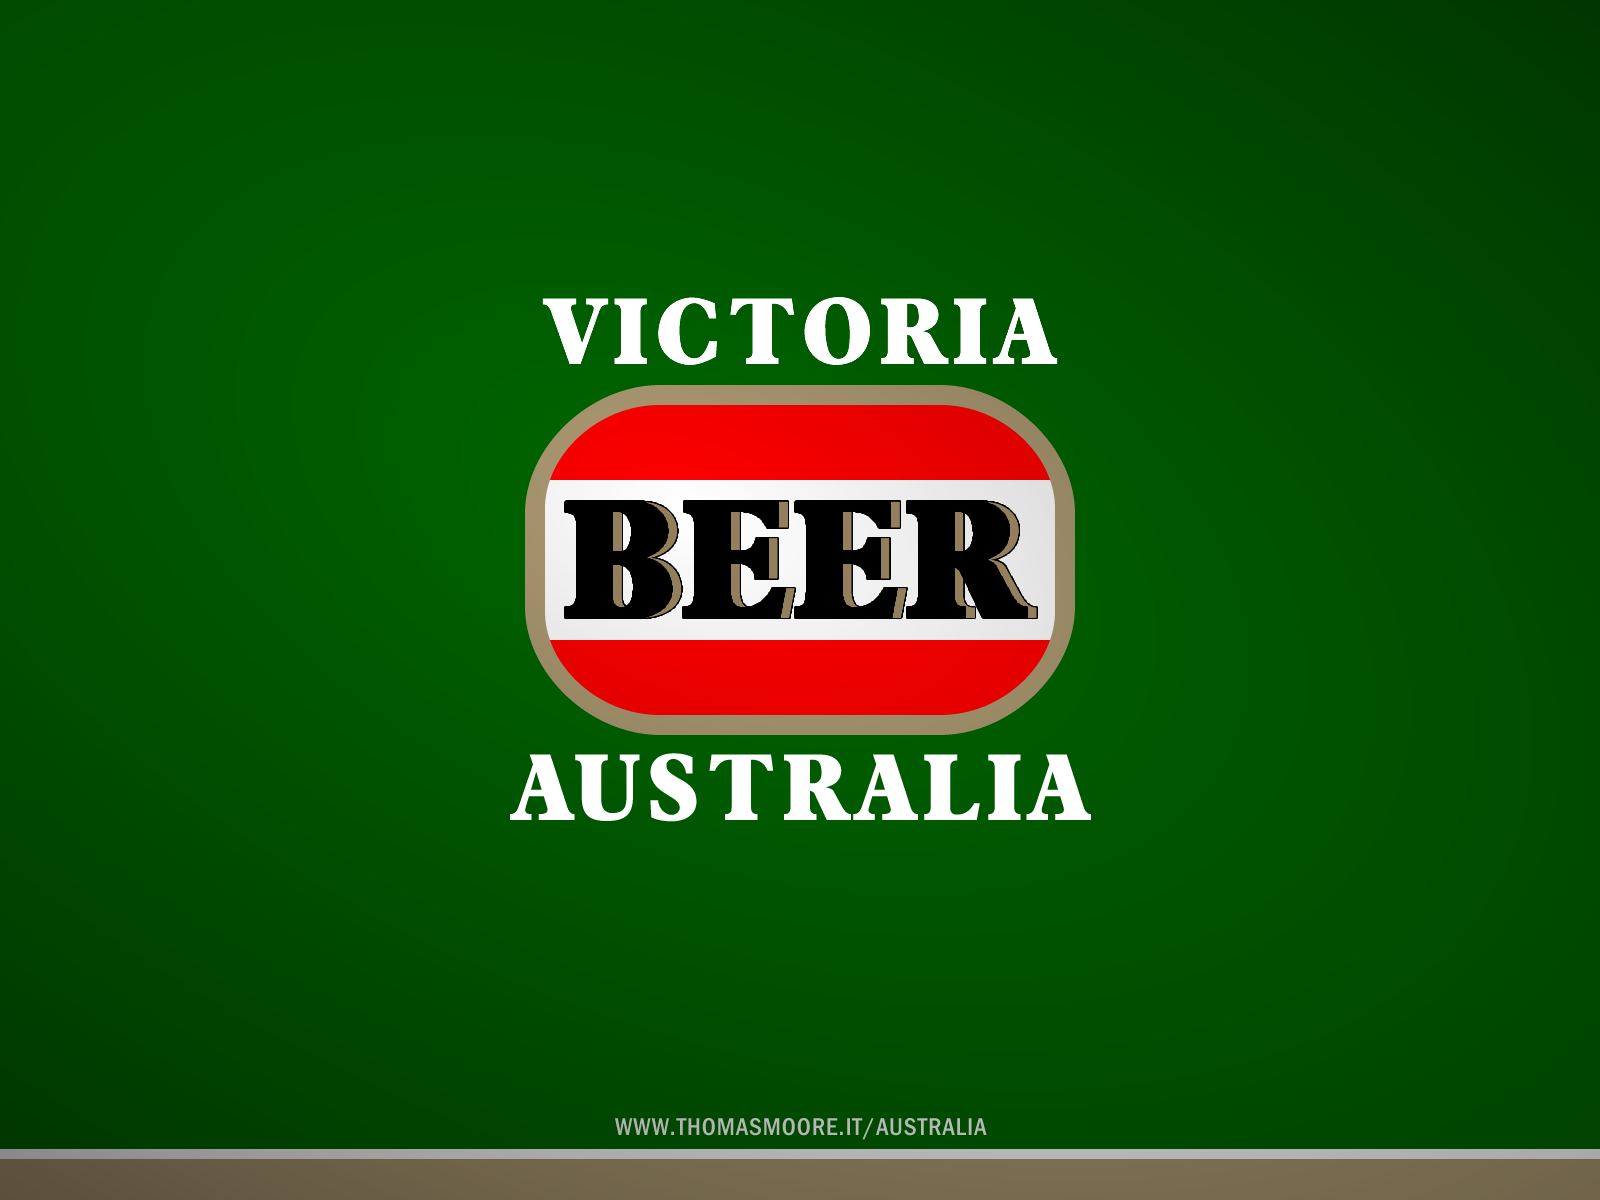 Victoria Bitter Beer Wallpaper and Background Imagex1200